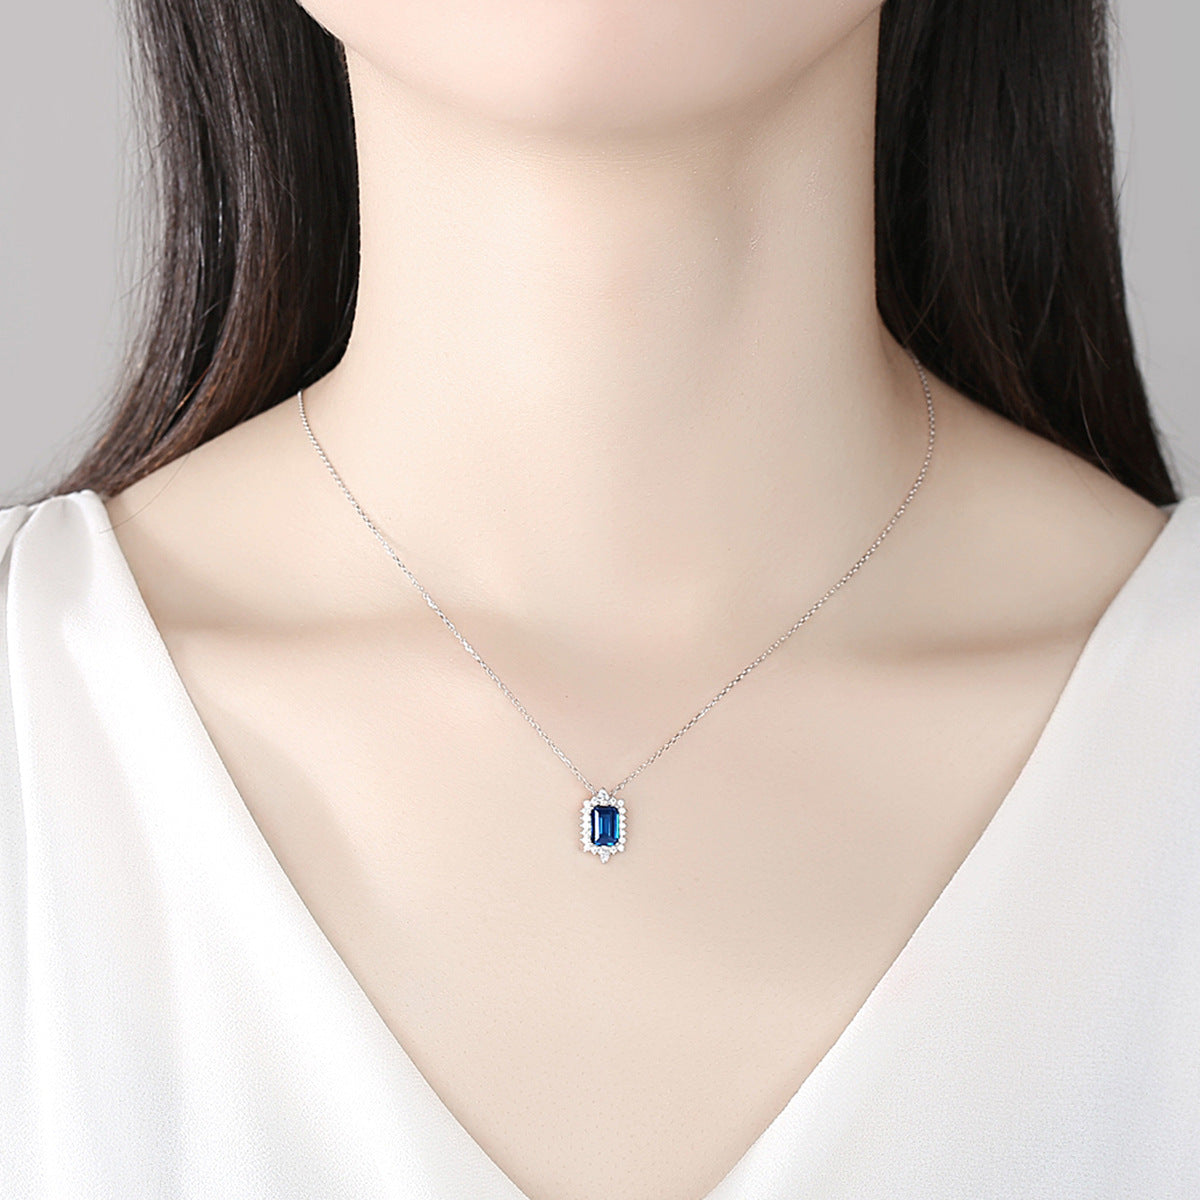 Gemstonely-925 Sterling Silver Necklace with Blue Simulate Sapphire Pendant - Elegant and Fashionable